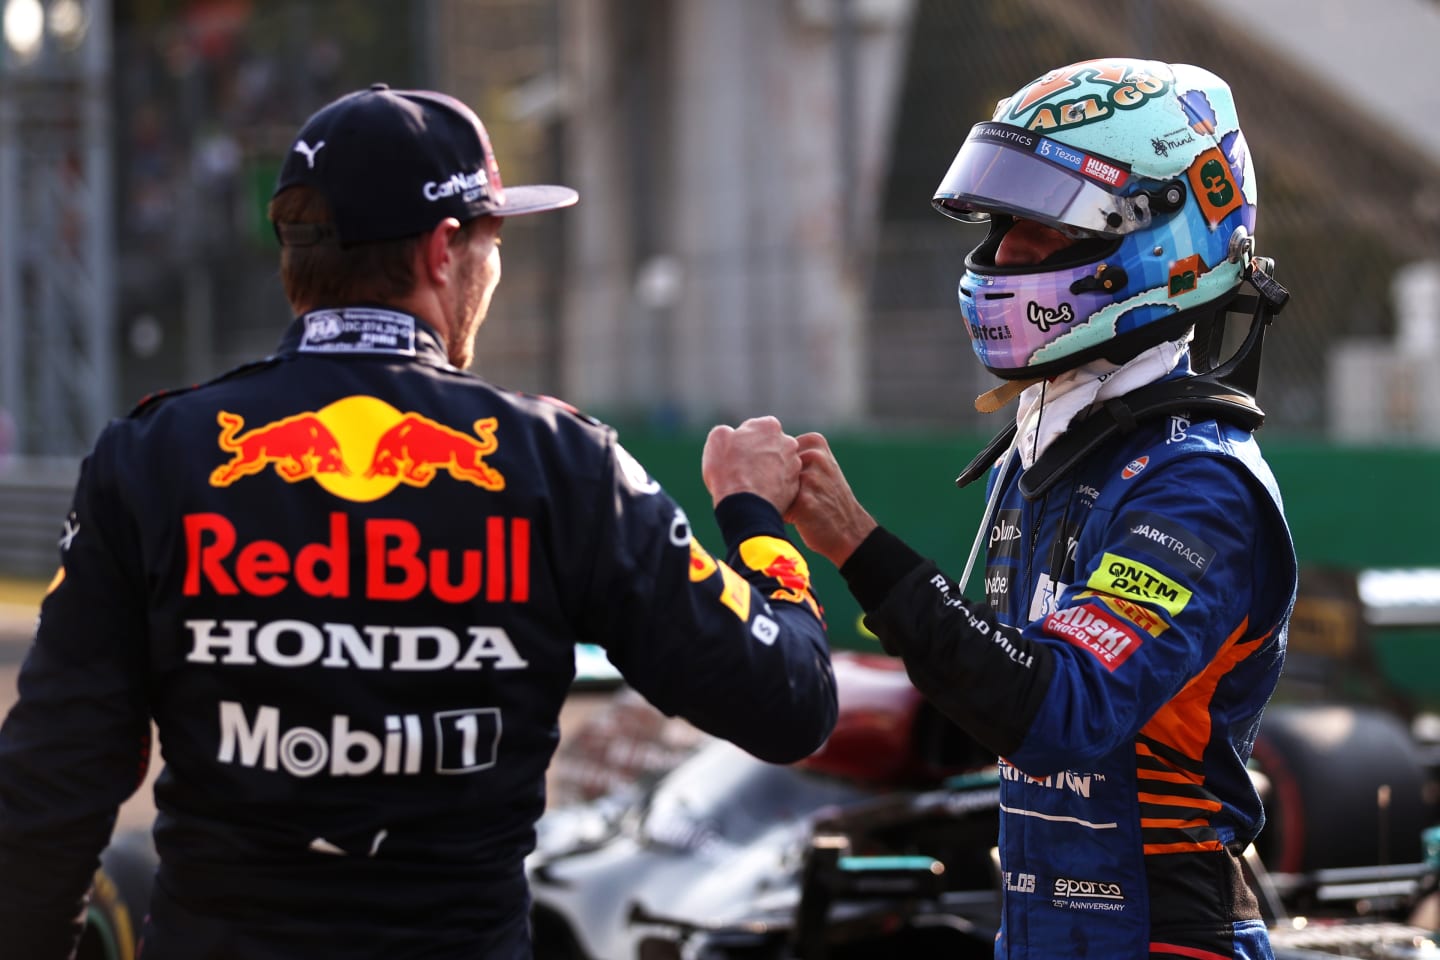 MONZA, ITALY - SEPTEMBER 11: Second place finisher Max Verstappen of Netherlands and Red Bull Racing talks with third place finisher Daniel Ricciardo of Australia and McLaren F1 in parc ferme during the Sprint ahead of the F1 Grand Prix of Italy at Autodromo di Monza on September 11, 2021 in Monza, Italy. (Photo by Lars Baron/Getty Images)